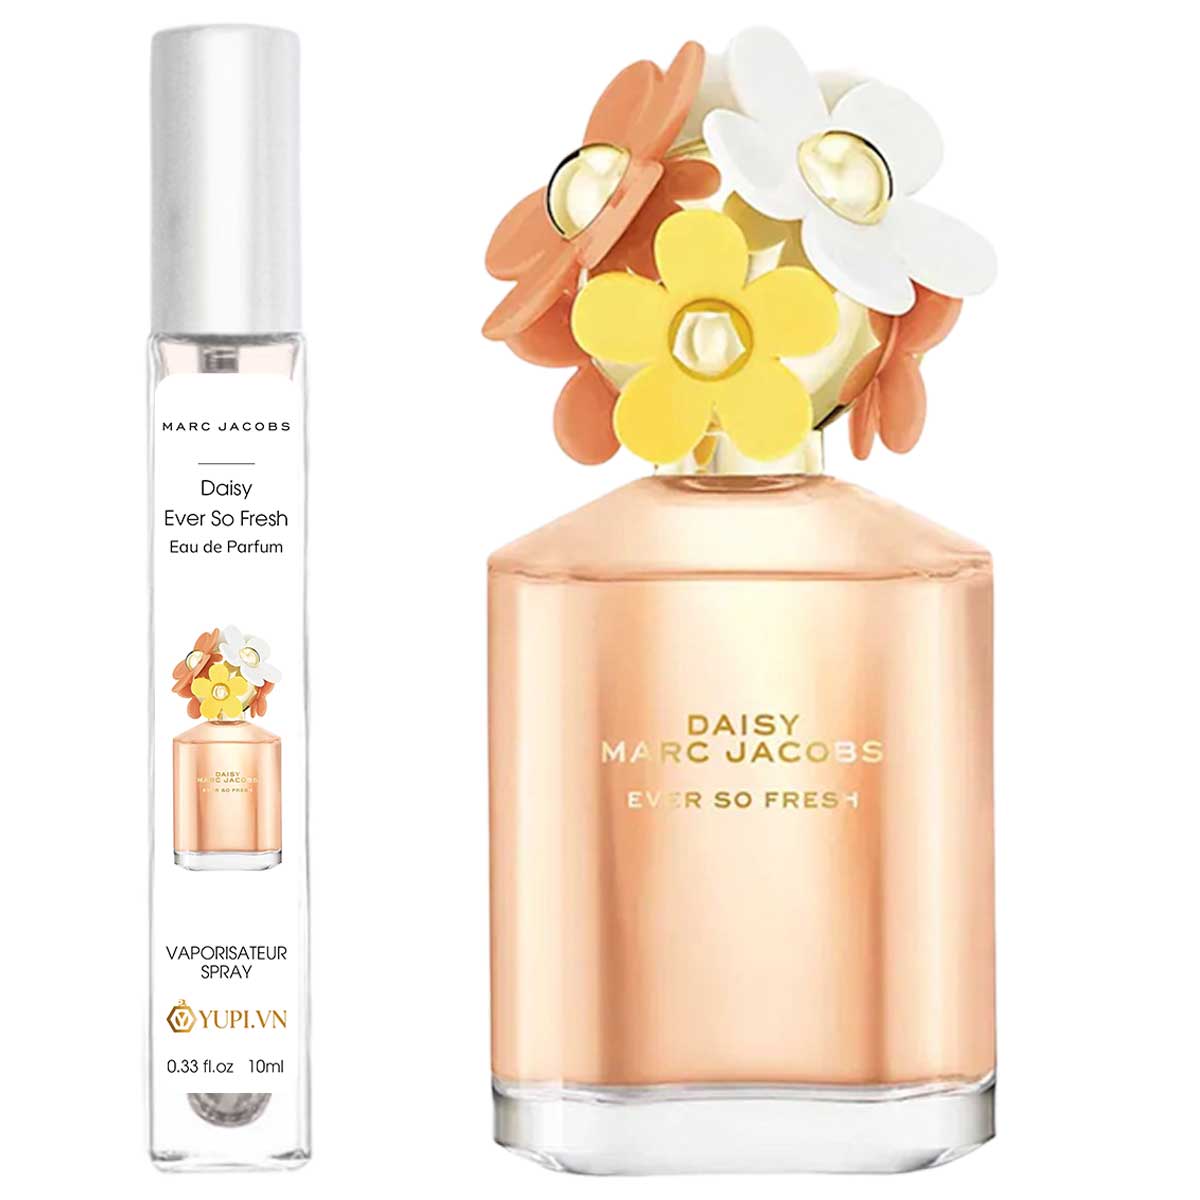 Marc Jacobs Daisy Ever So Fresh Chiết 10ml